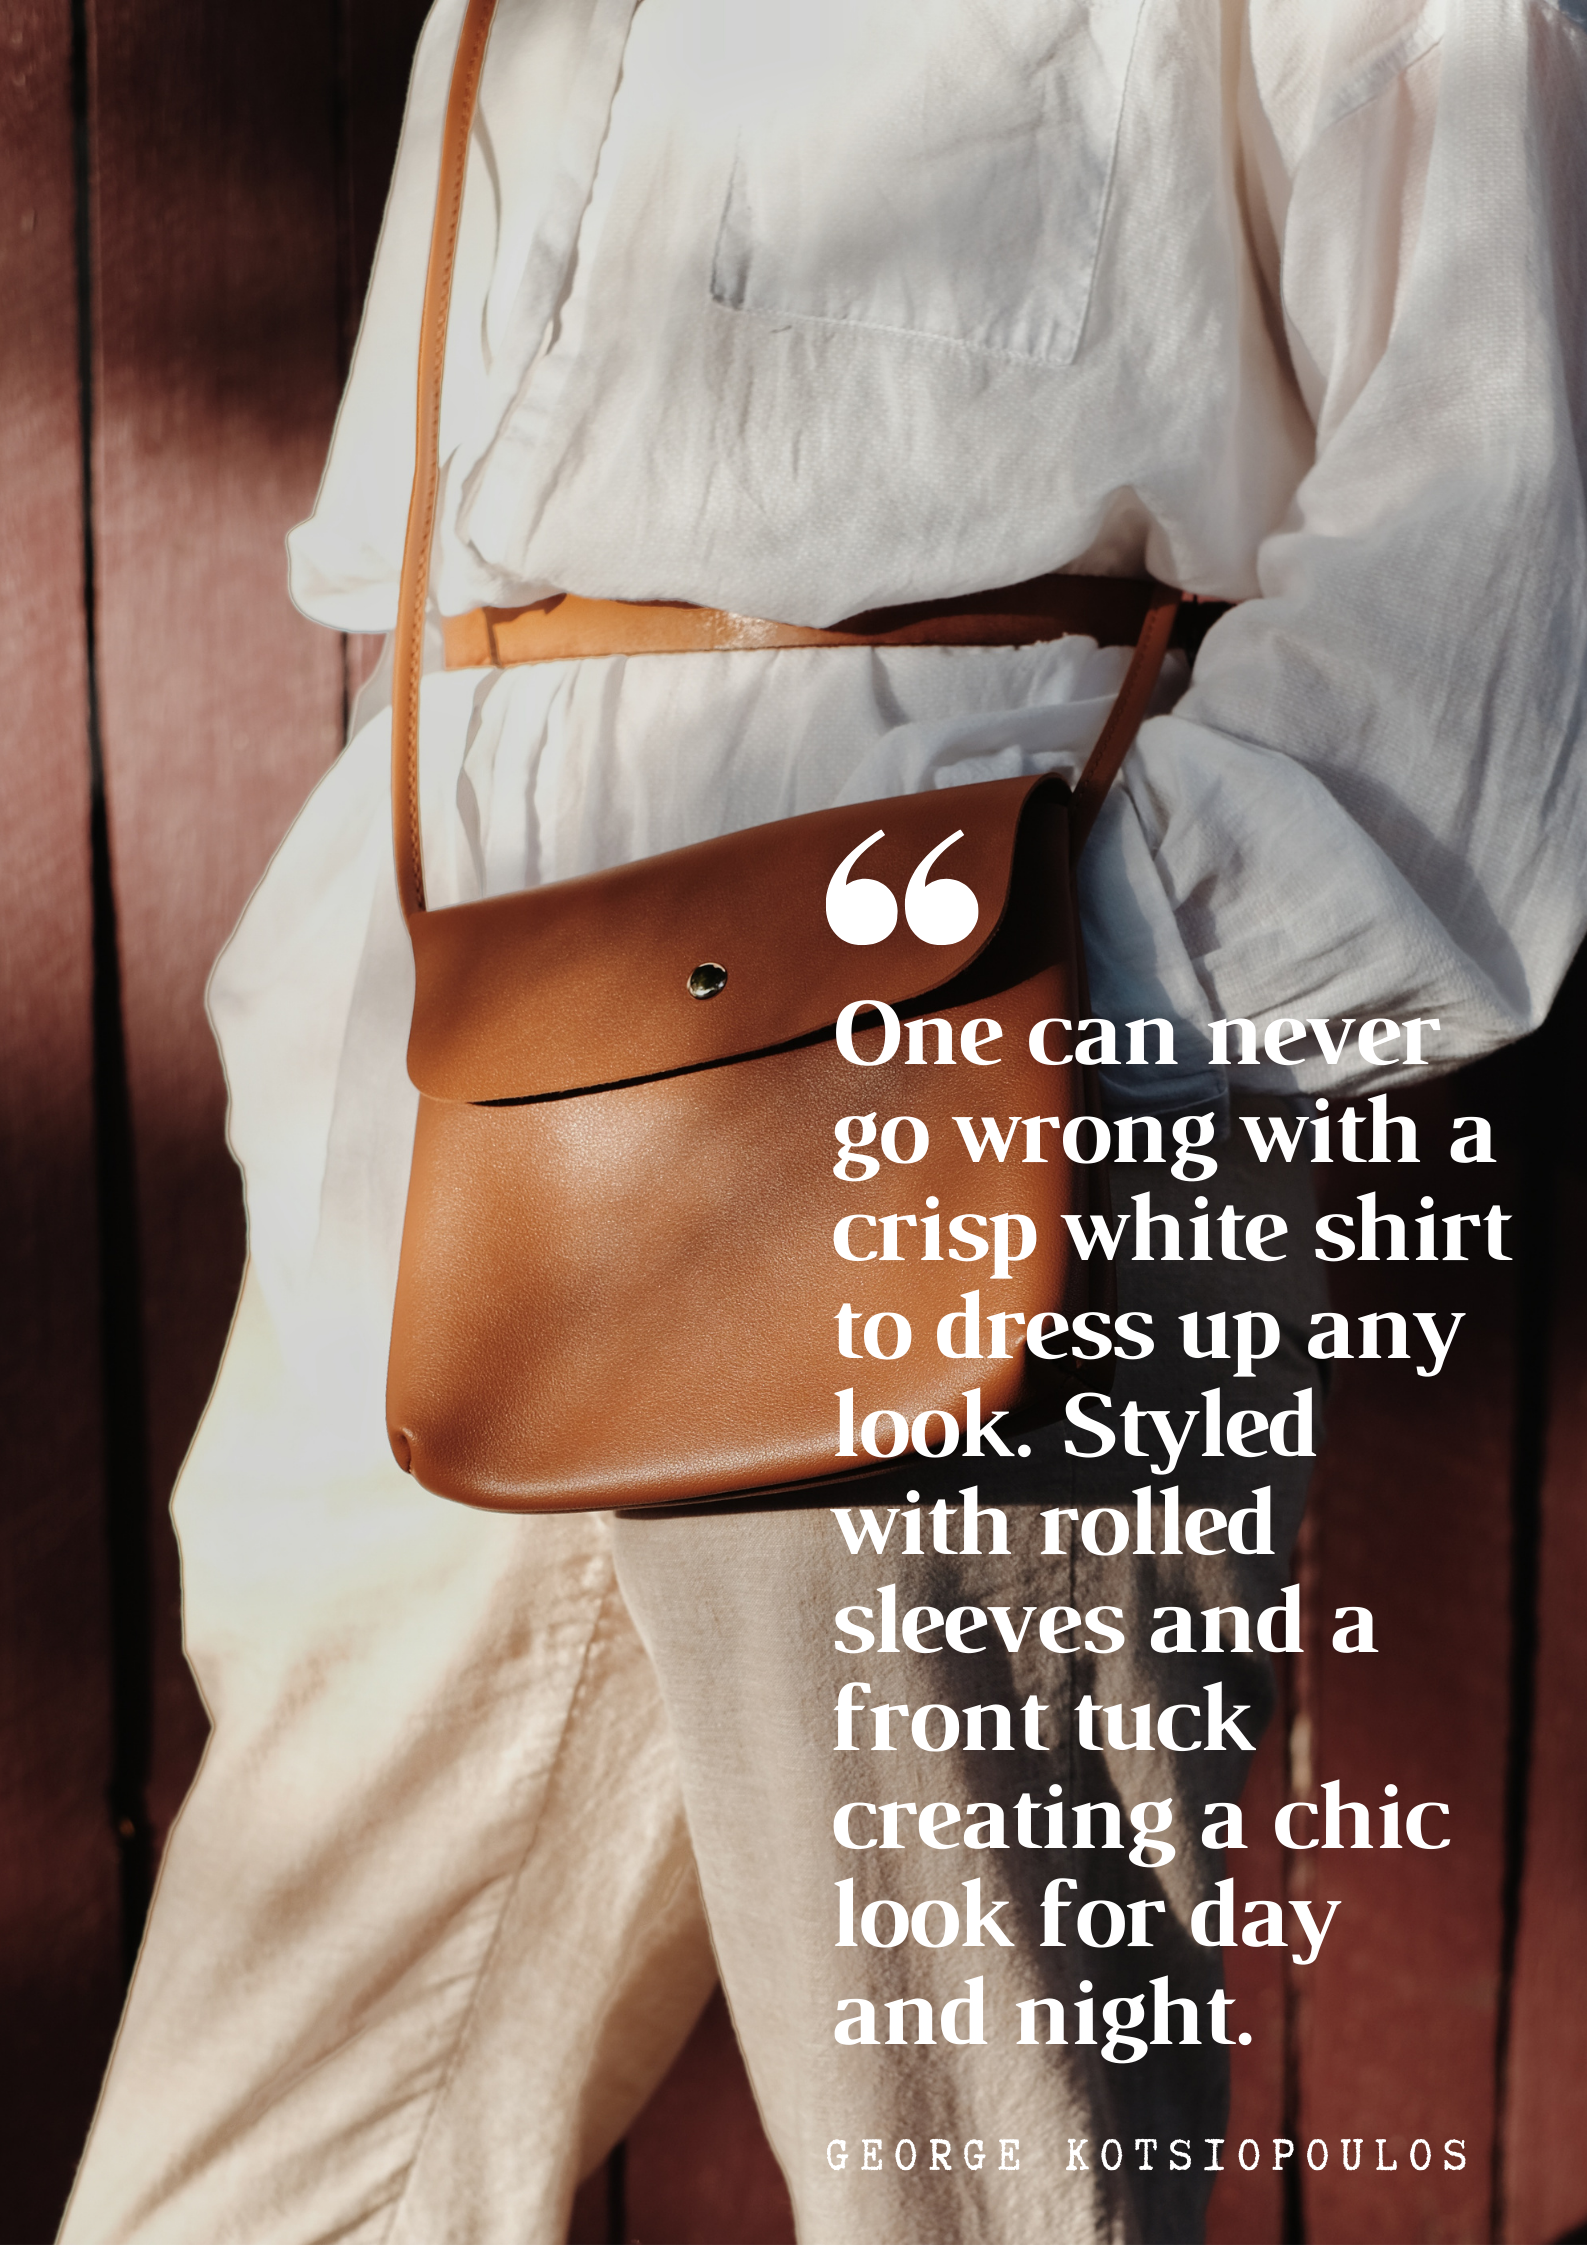 A person poses leaning against a wall wearing white linen pants, a shirt, and a caramel leather cross-body purse. White text over the image says, "One can never go wrong with a crisp white shirt to dress up any look. Styled with rolled sleeves and a front tuck creating a chic look for day and night. - George Kotsiopoulos"